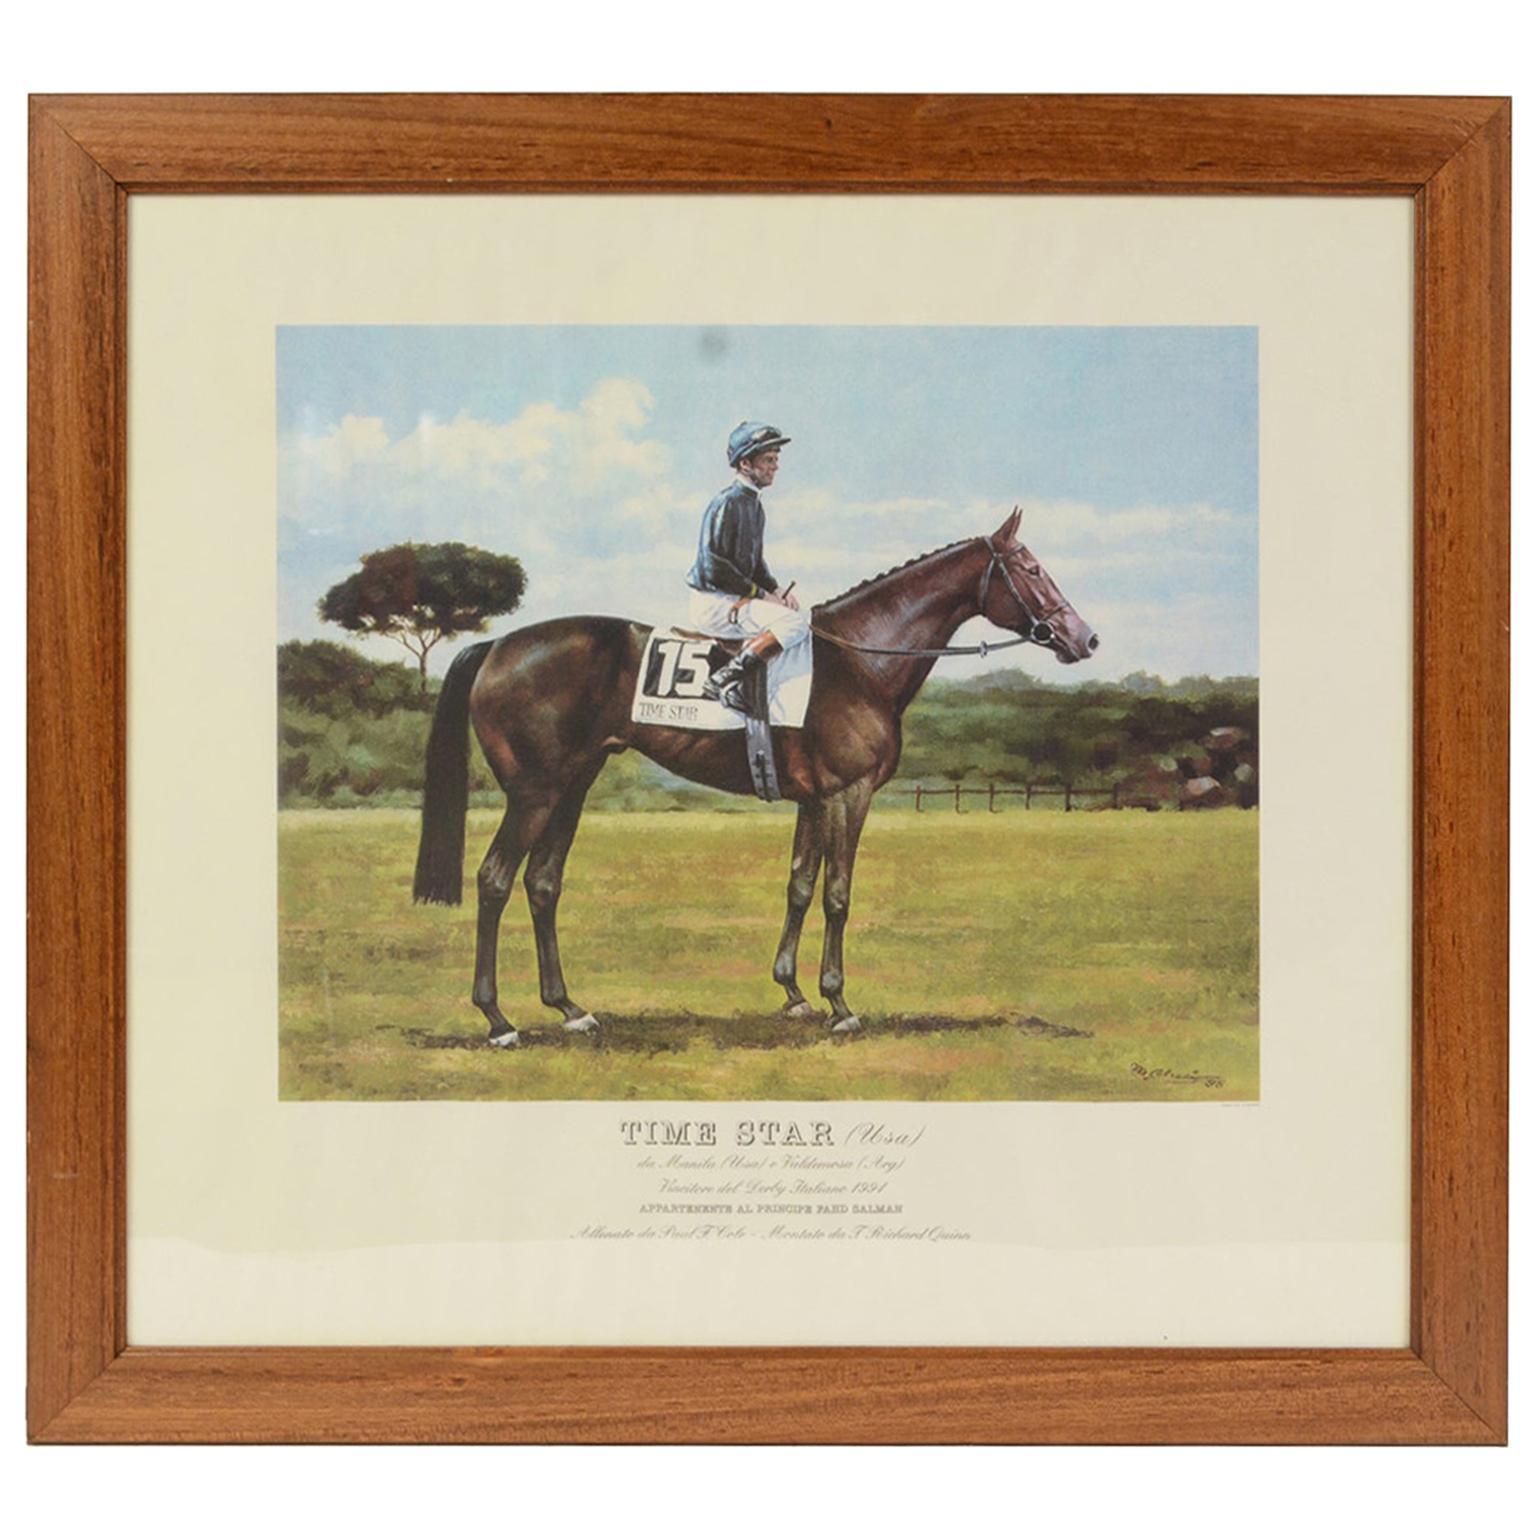 Lithograph Depicting the Horse Winner of the 1994 Italian Derby For Sale